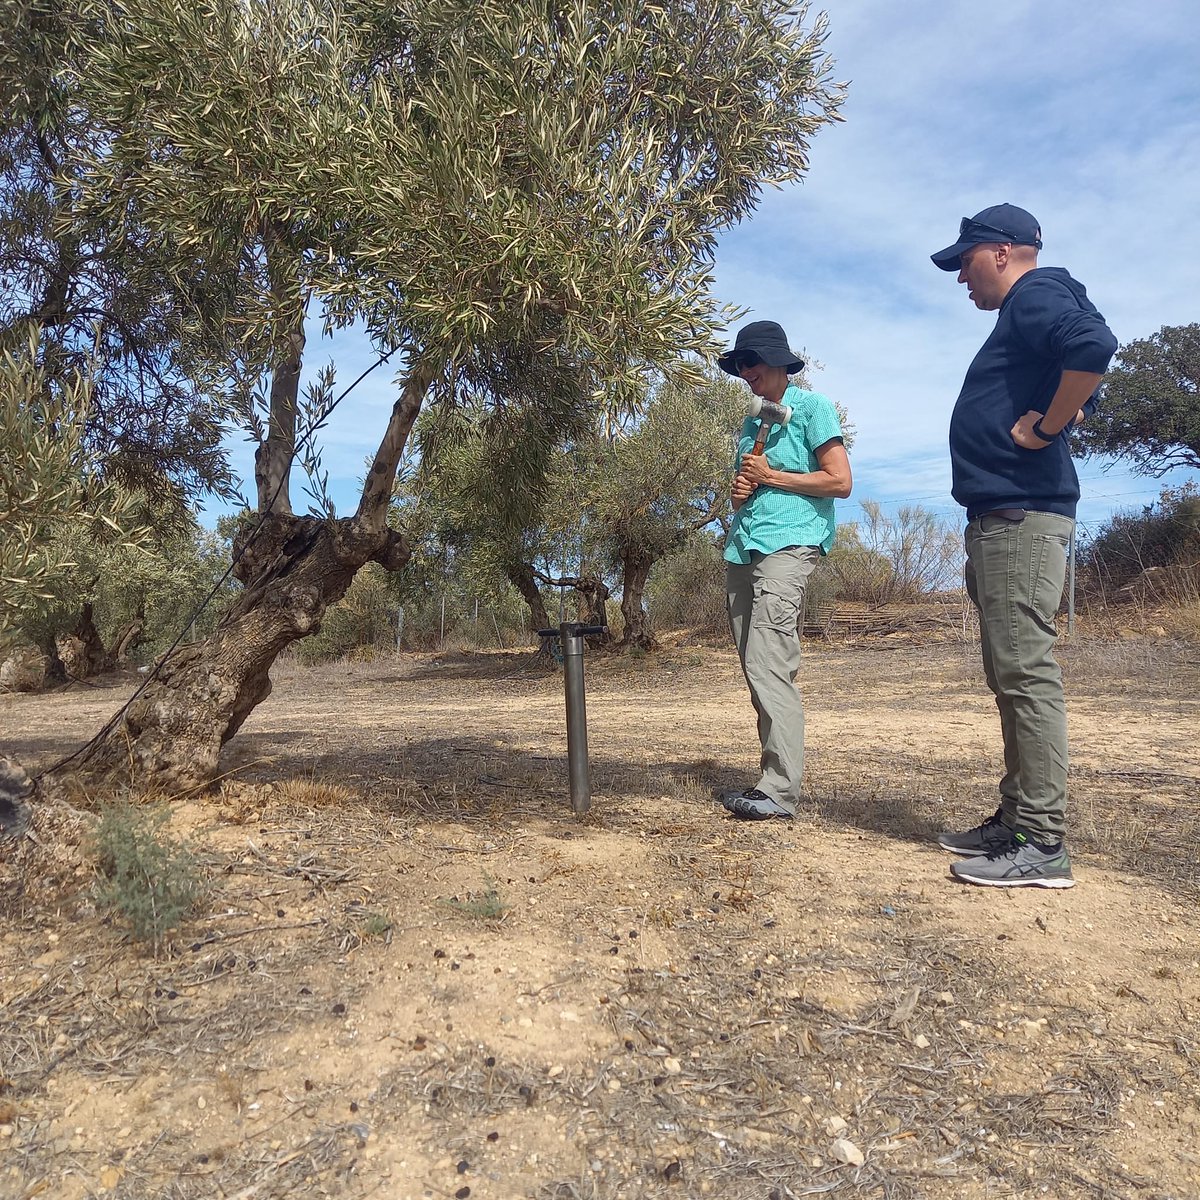 Scientists from @UniBasel_en @Scienze_RomaTre   & @ujaen are working hard to investigate historical and current soil erosion in olive orchards for the Soil O-live project. Well done guys. #SoilMission #SoilErosion